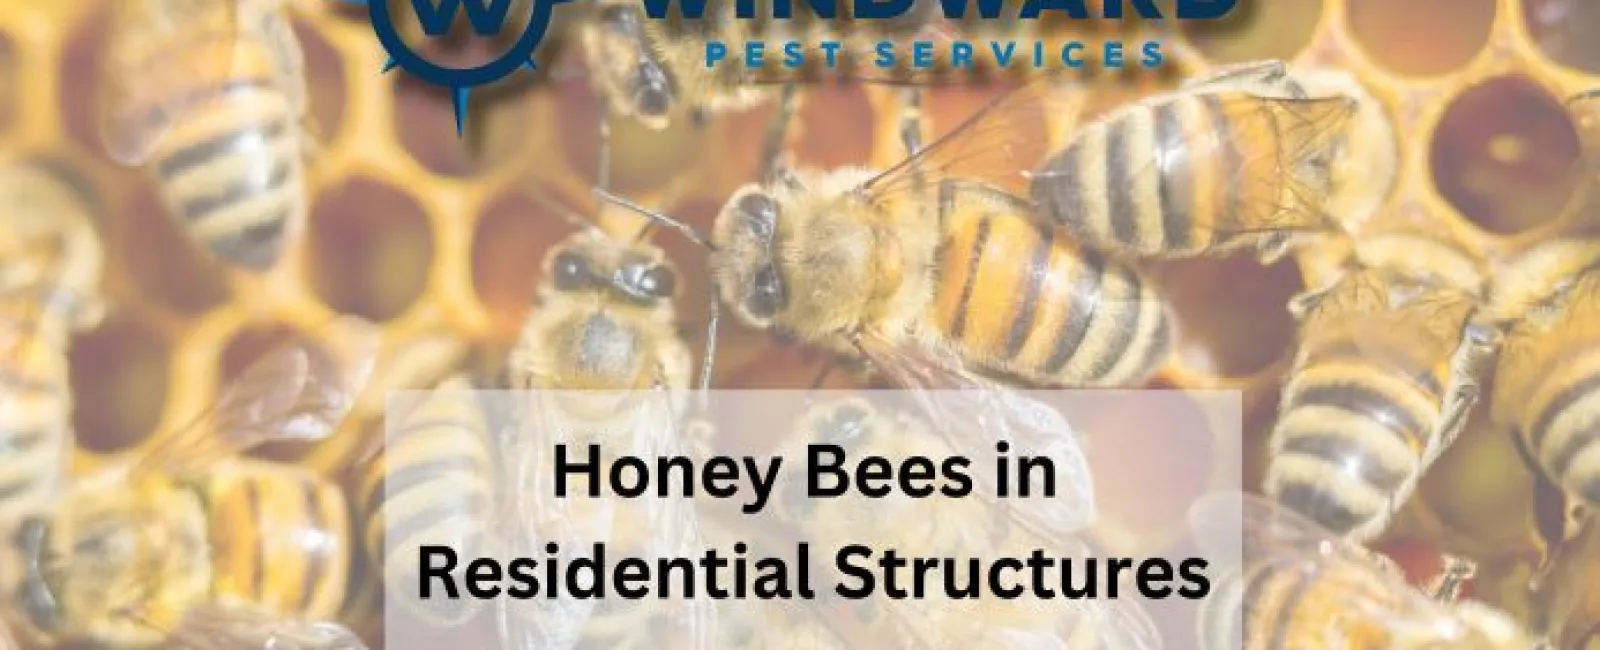 Honey Bees in Residential Structures